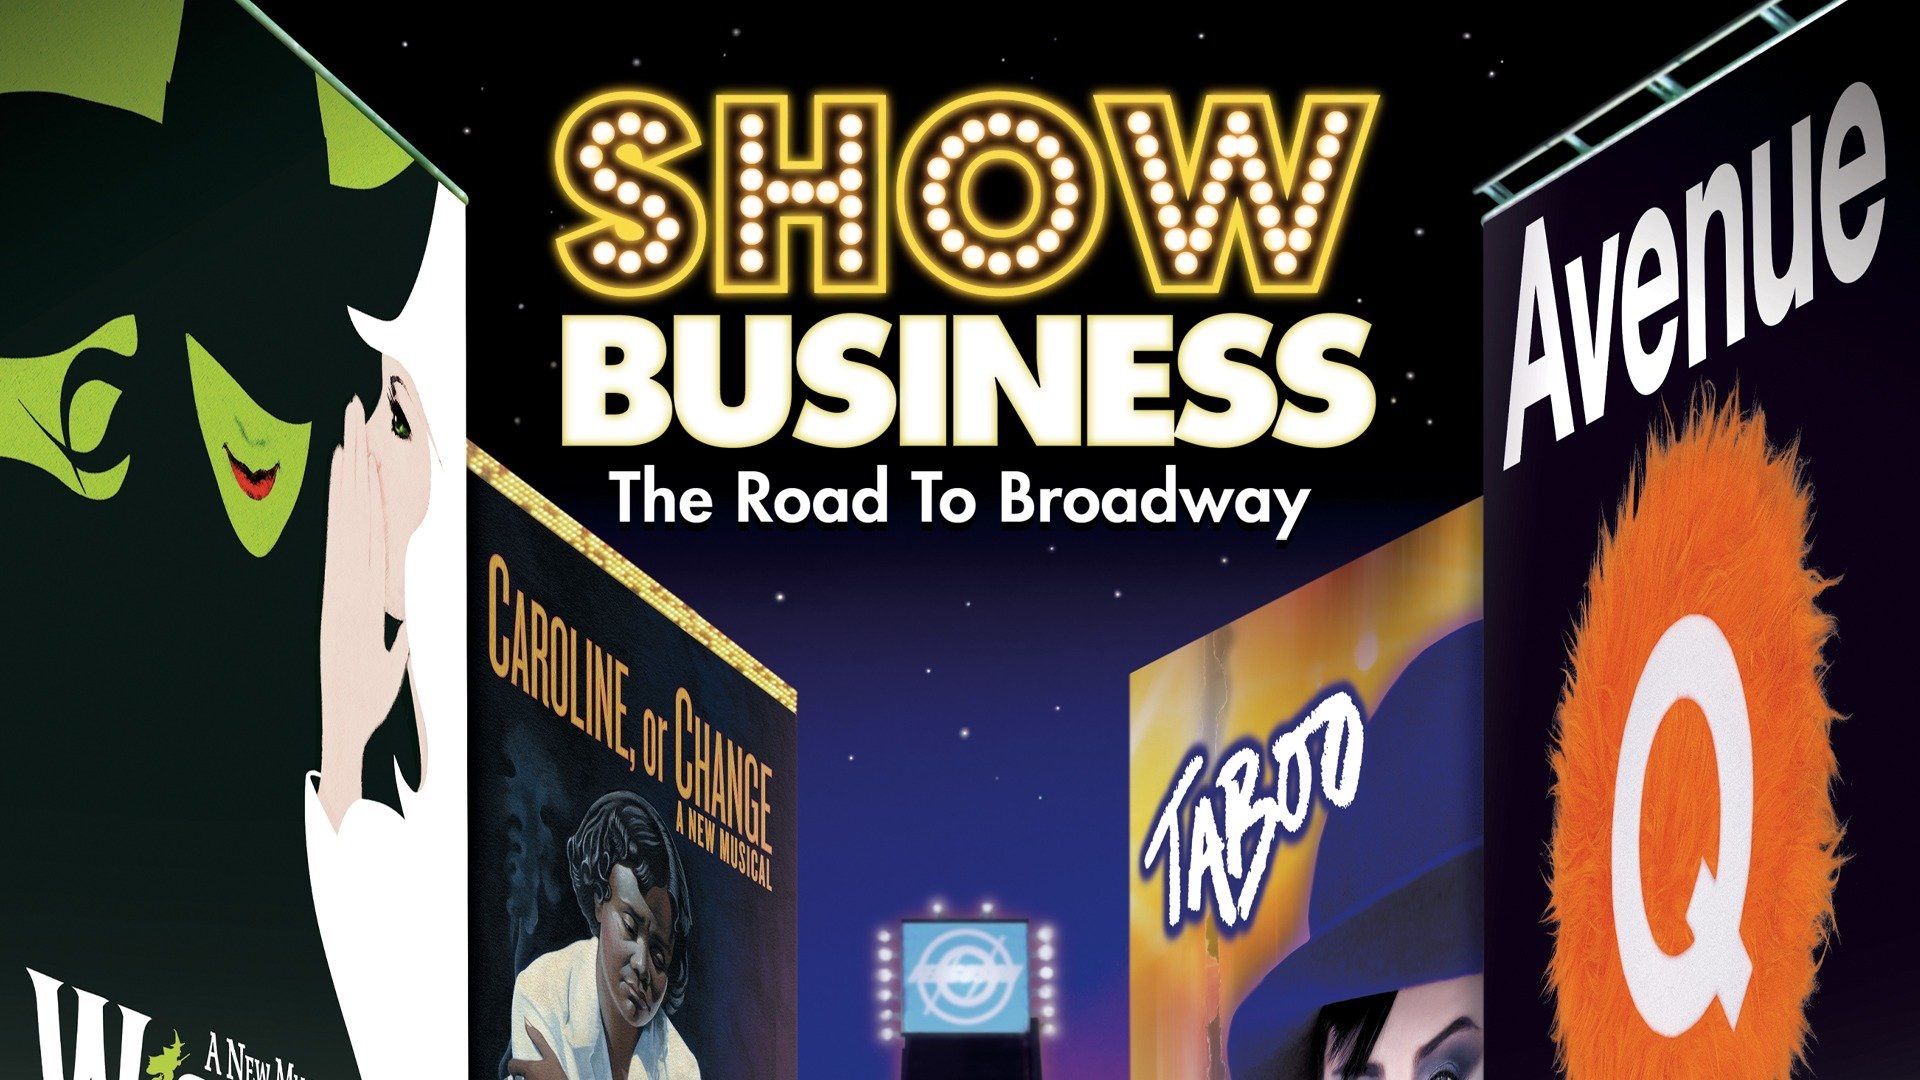 ShowBusiness: The Road to Broadway Backdrop